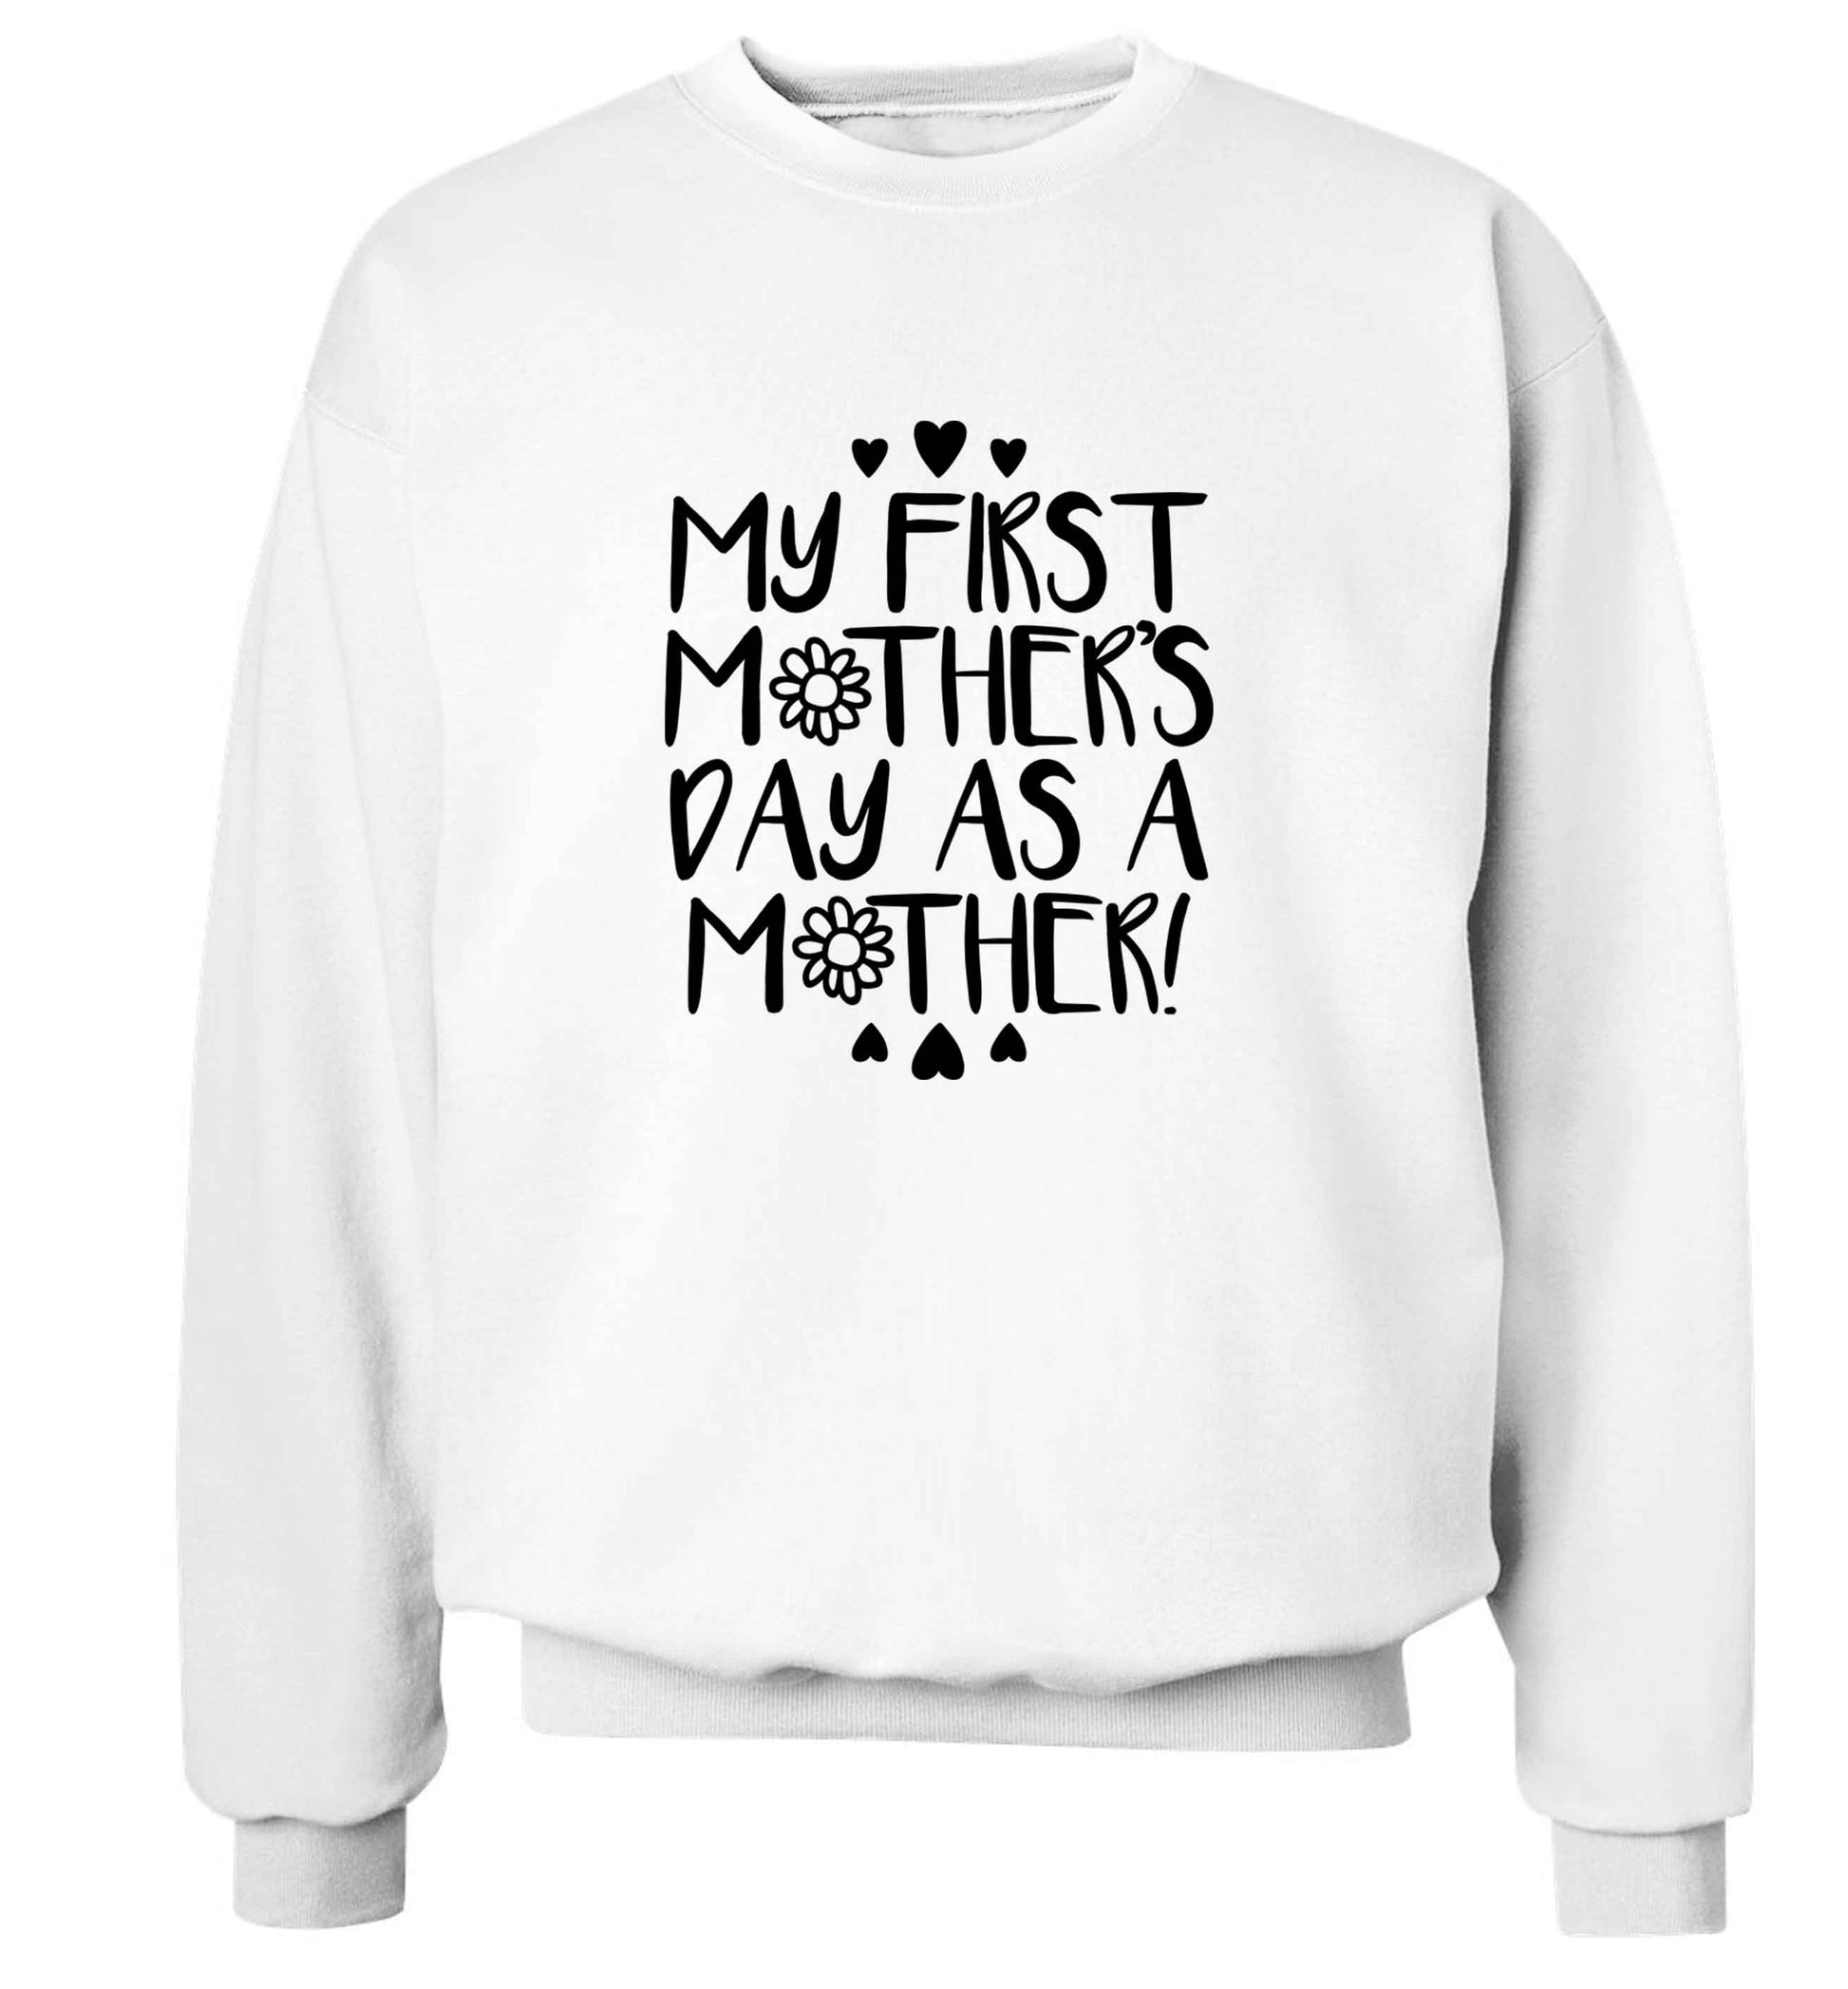 It's my first mother's day as a mother adult's unisex white sweater 2XL